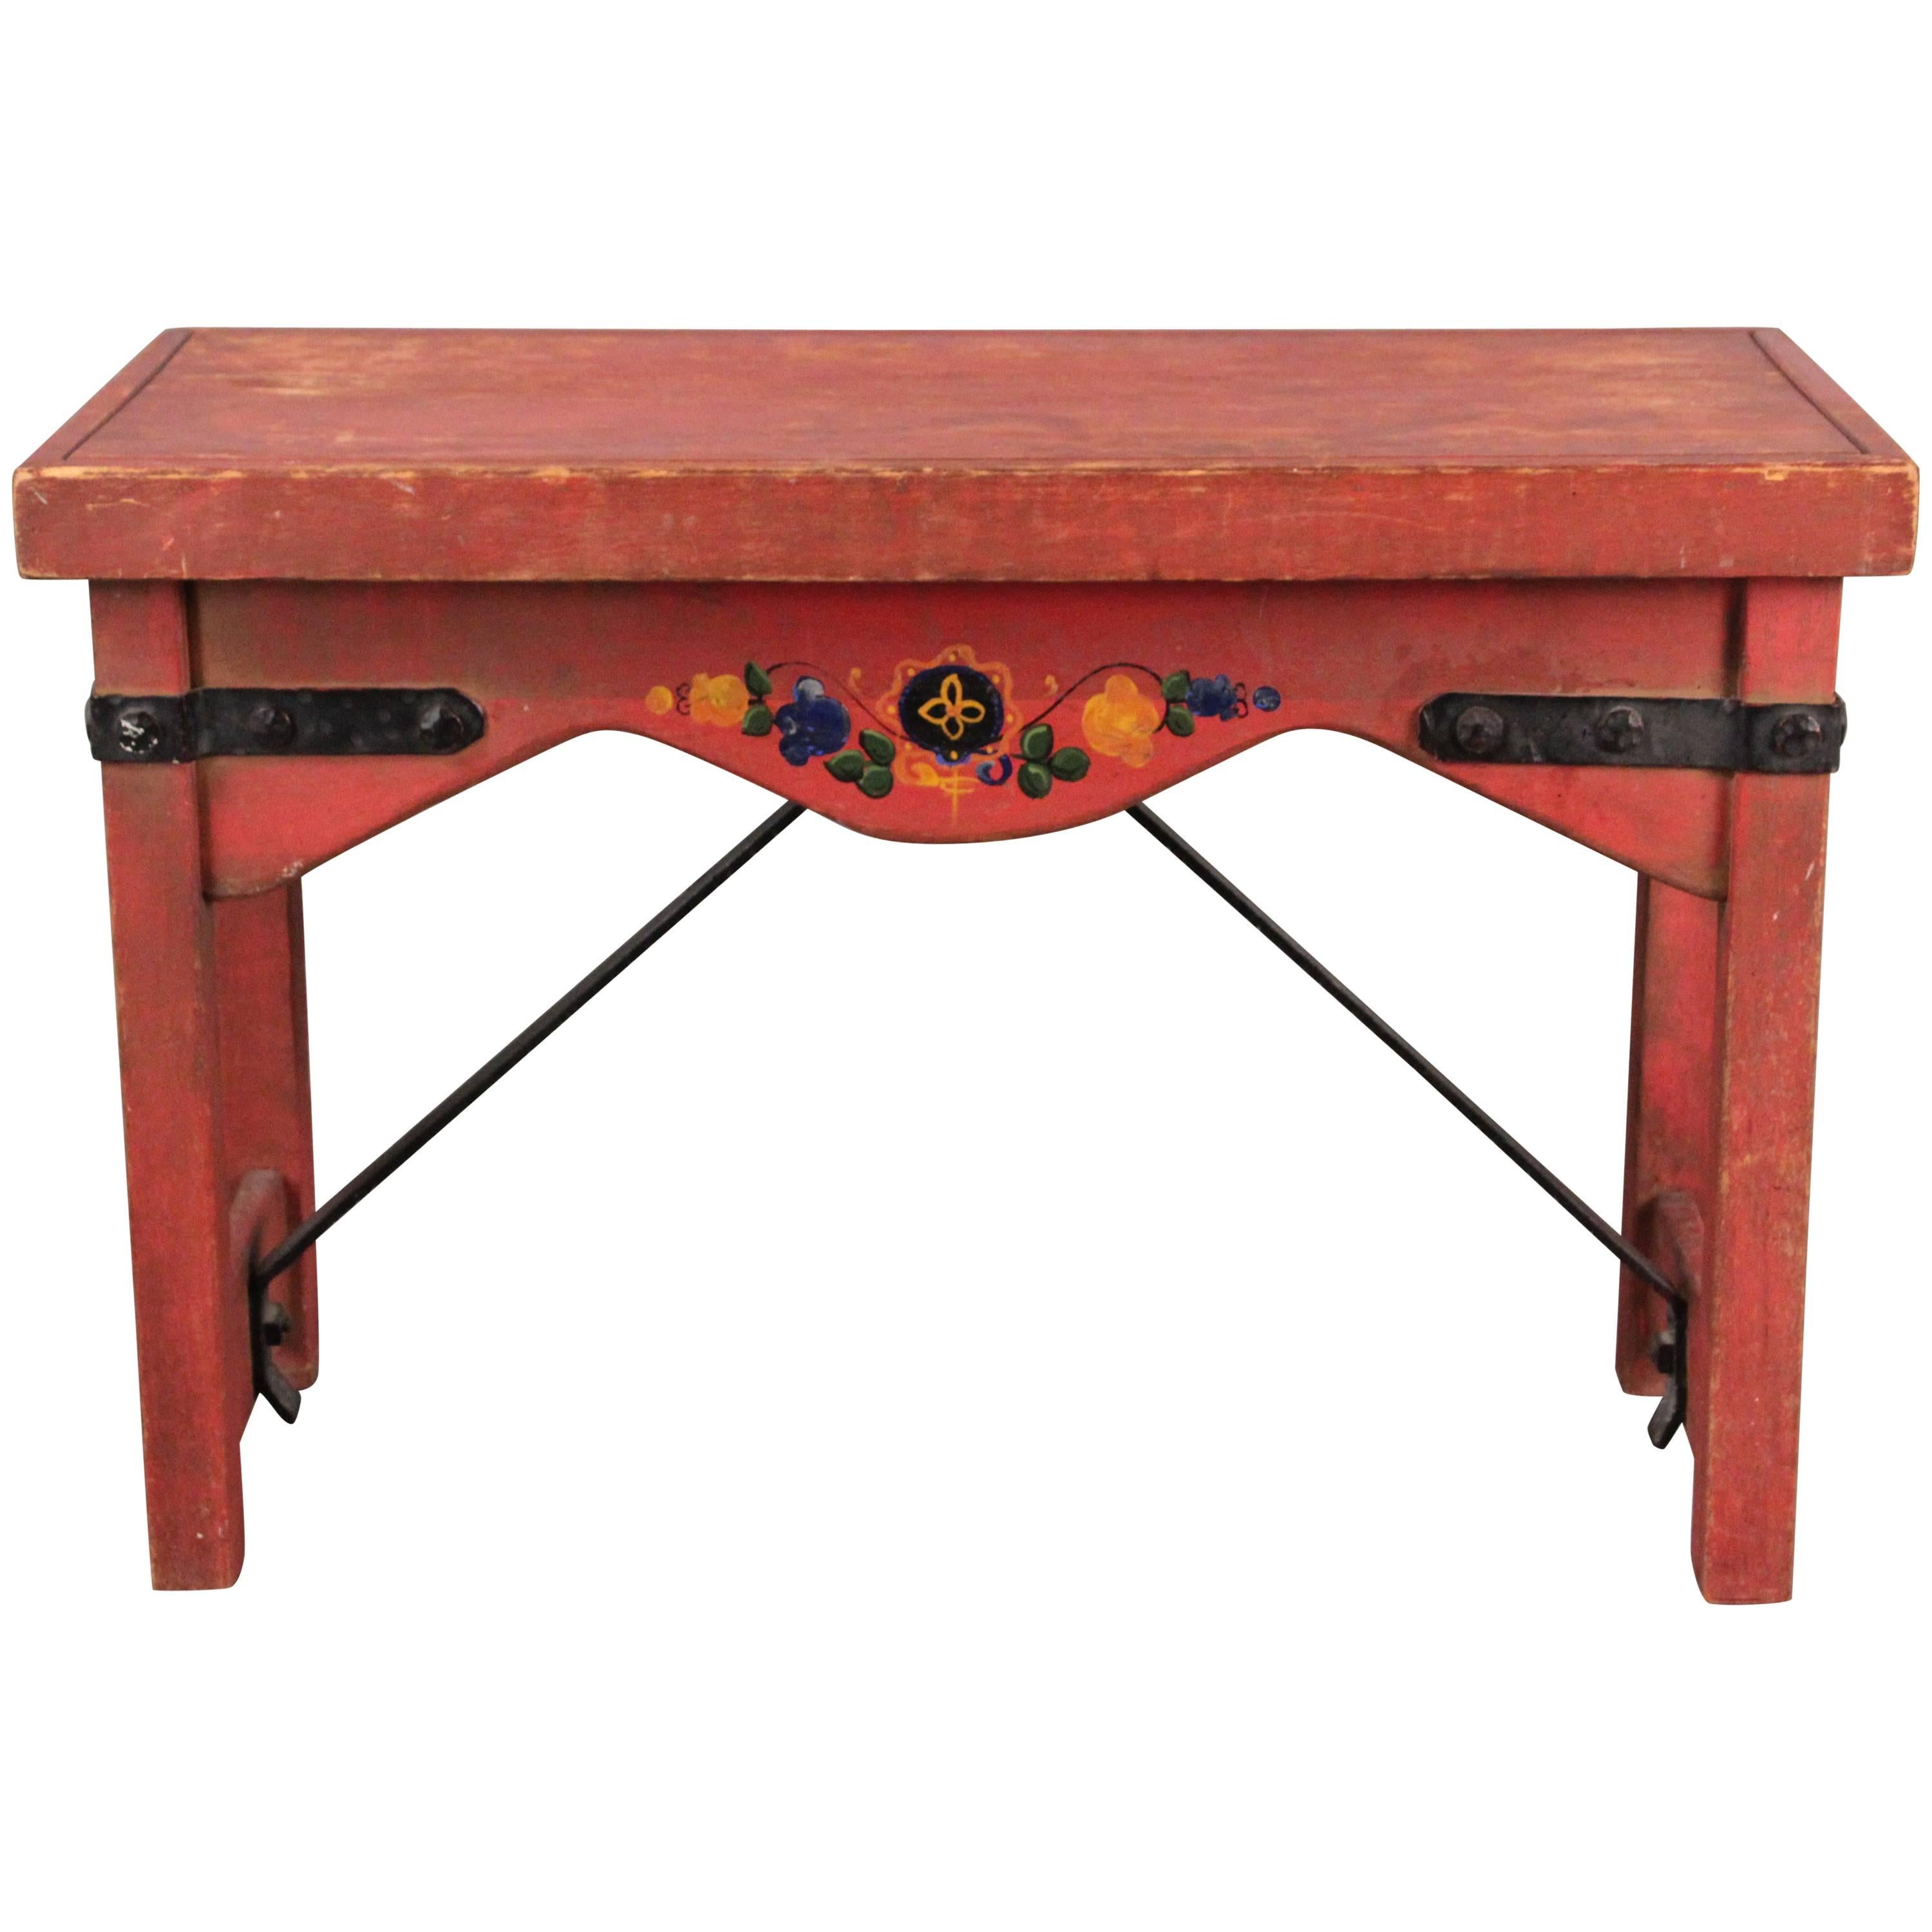 Tall Original Red Monterey Bench with Iron Stretcher